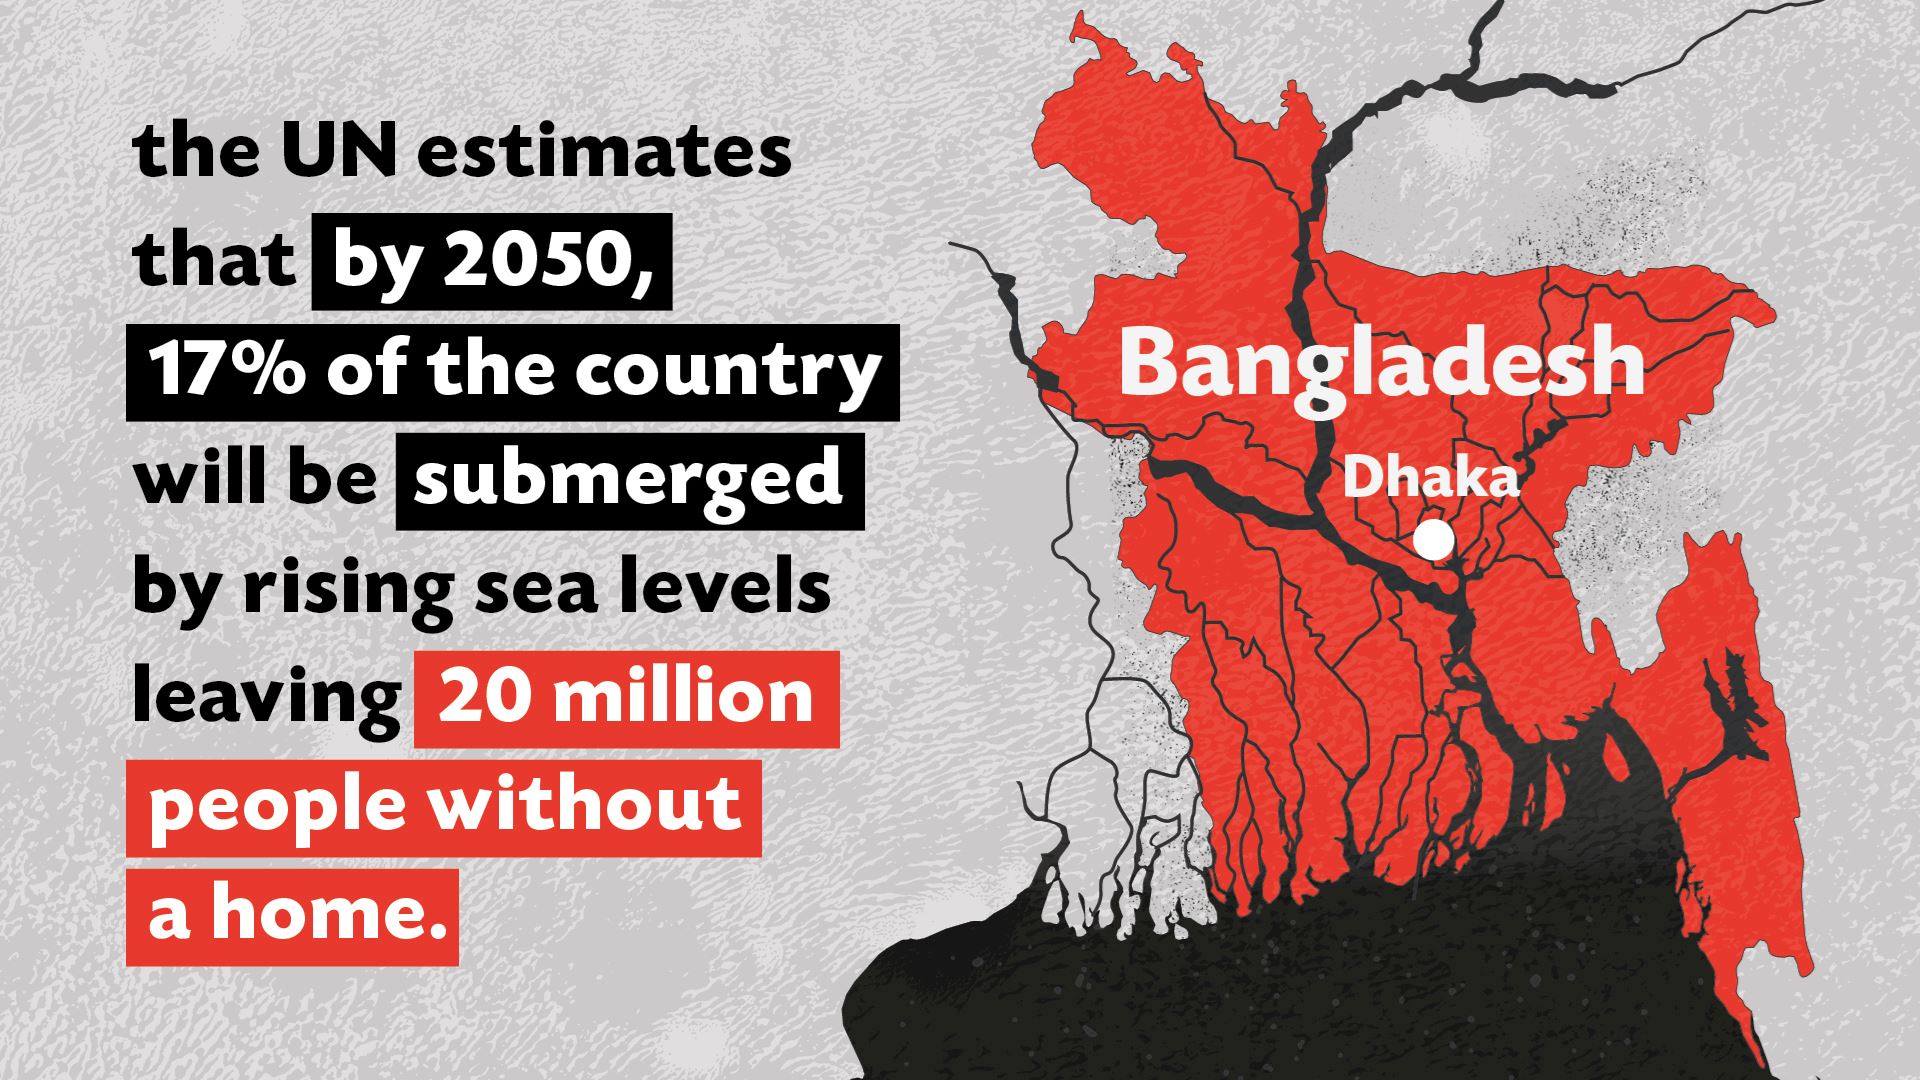 climate change and its impact on bangladesh essay